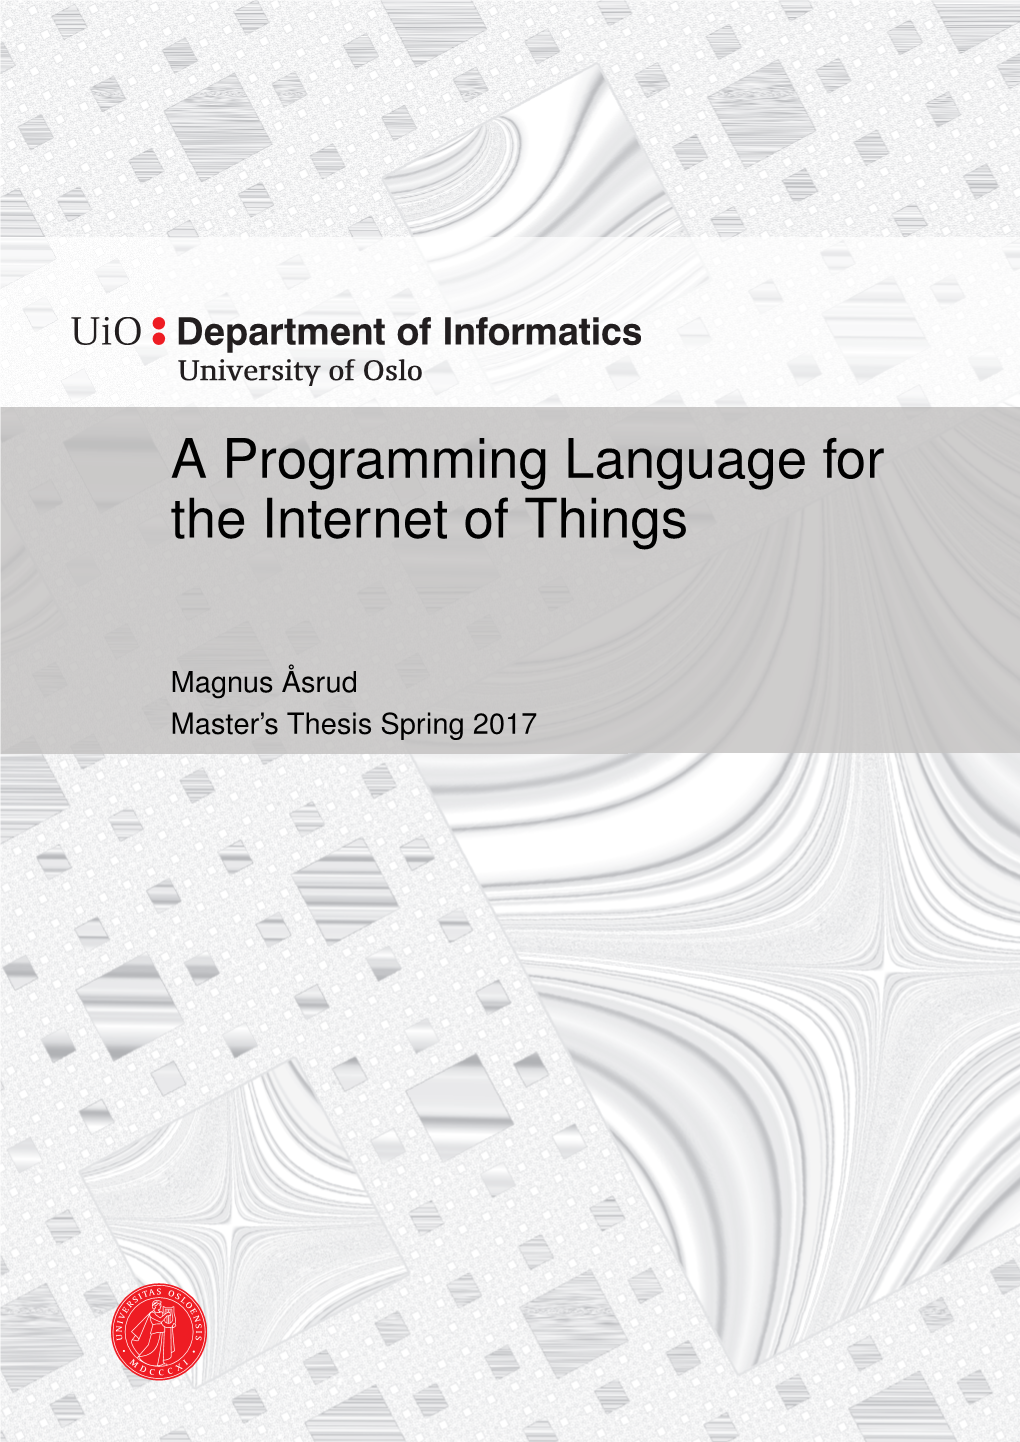 A Programming Language for the Internet of Things